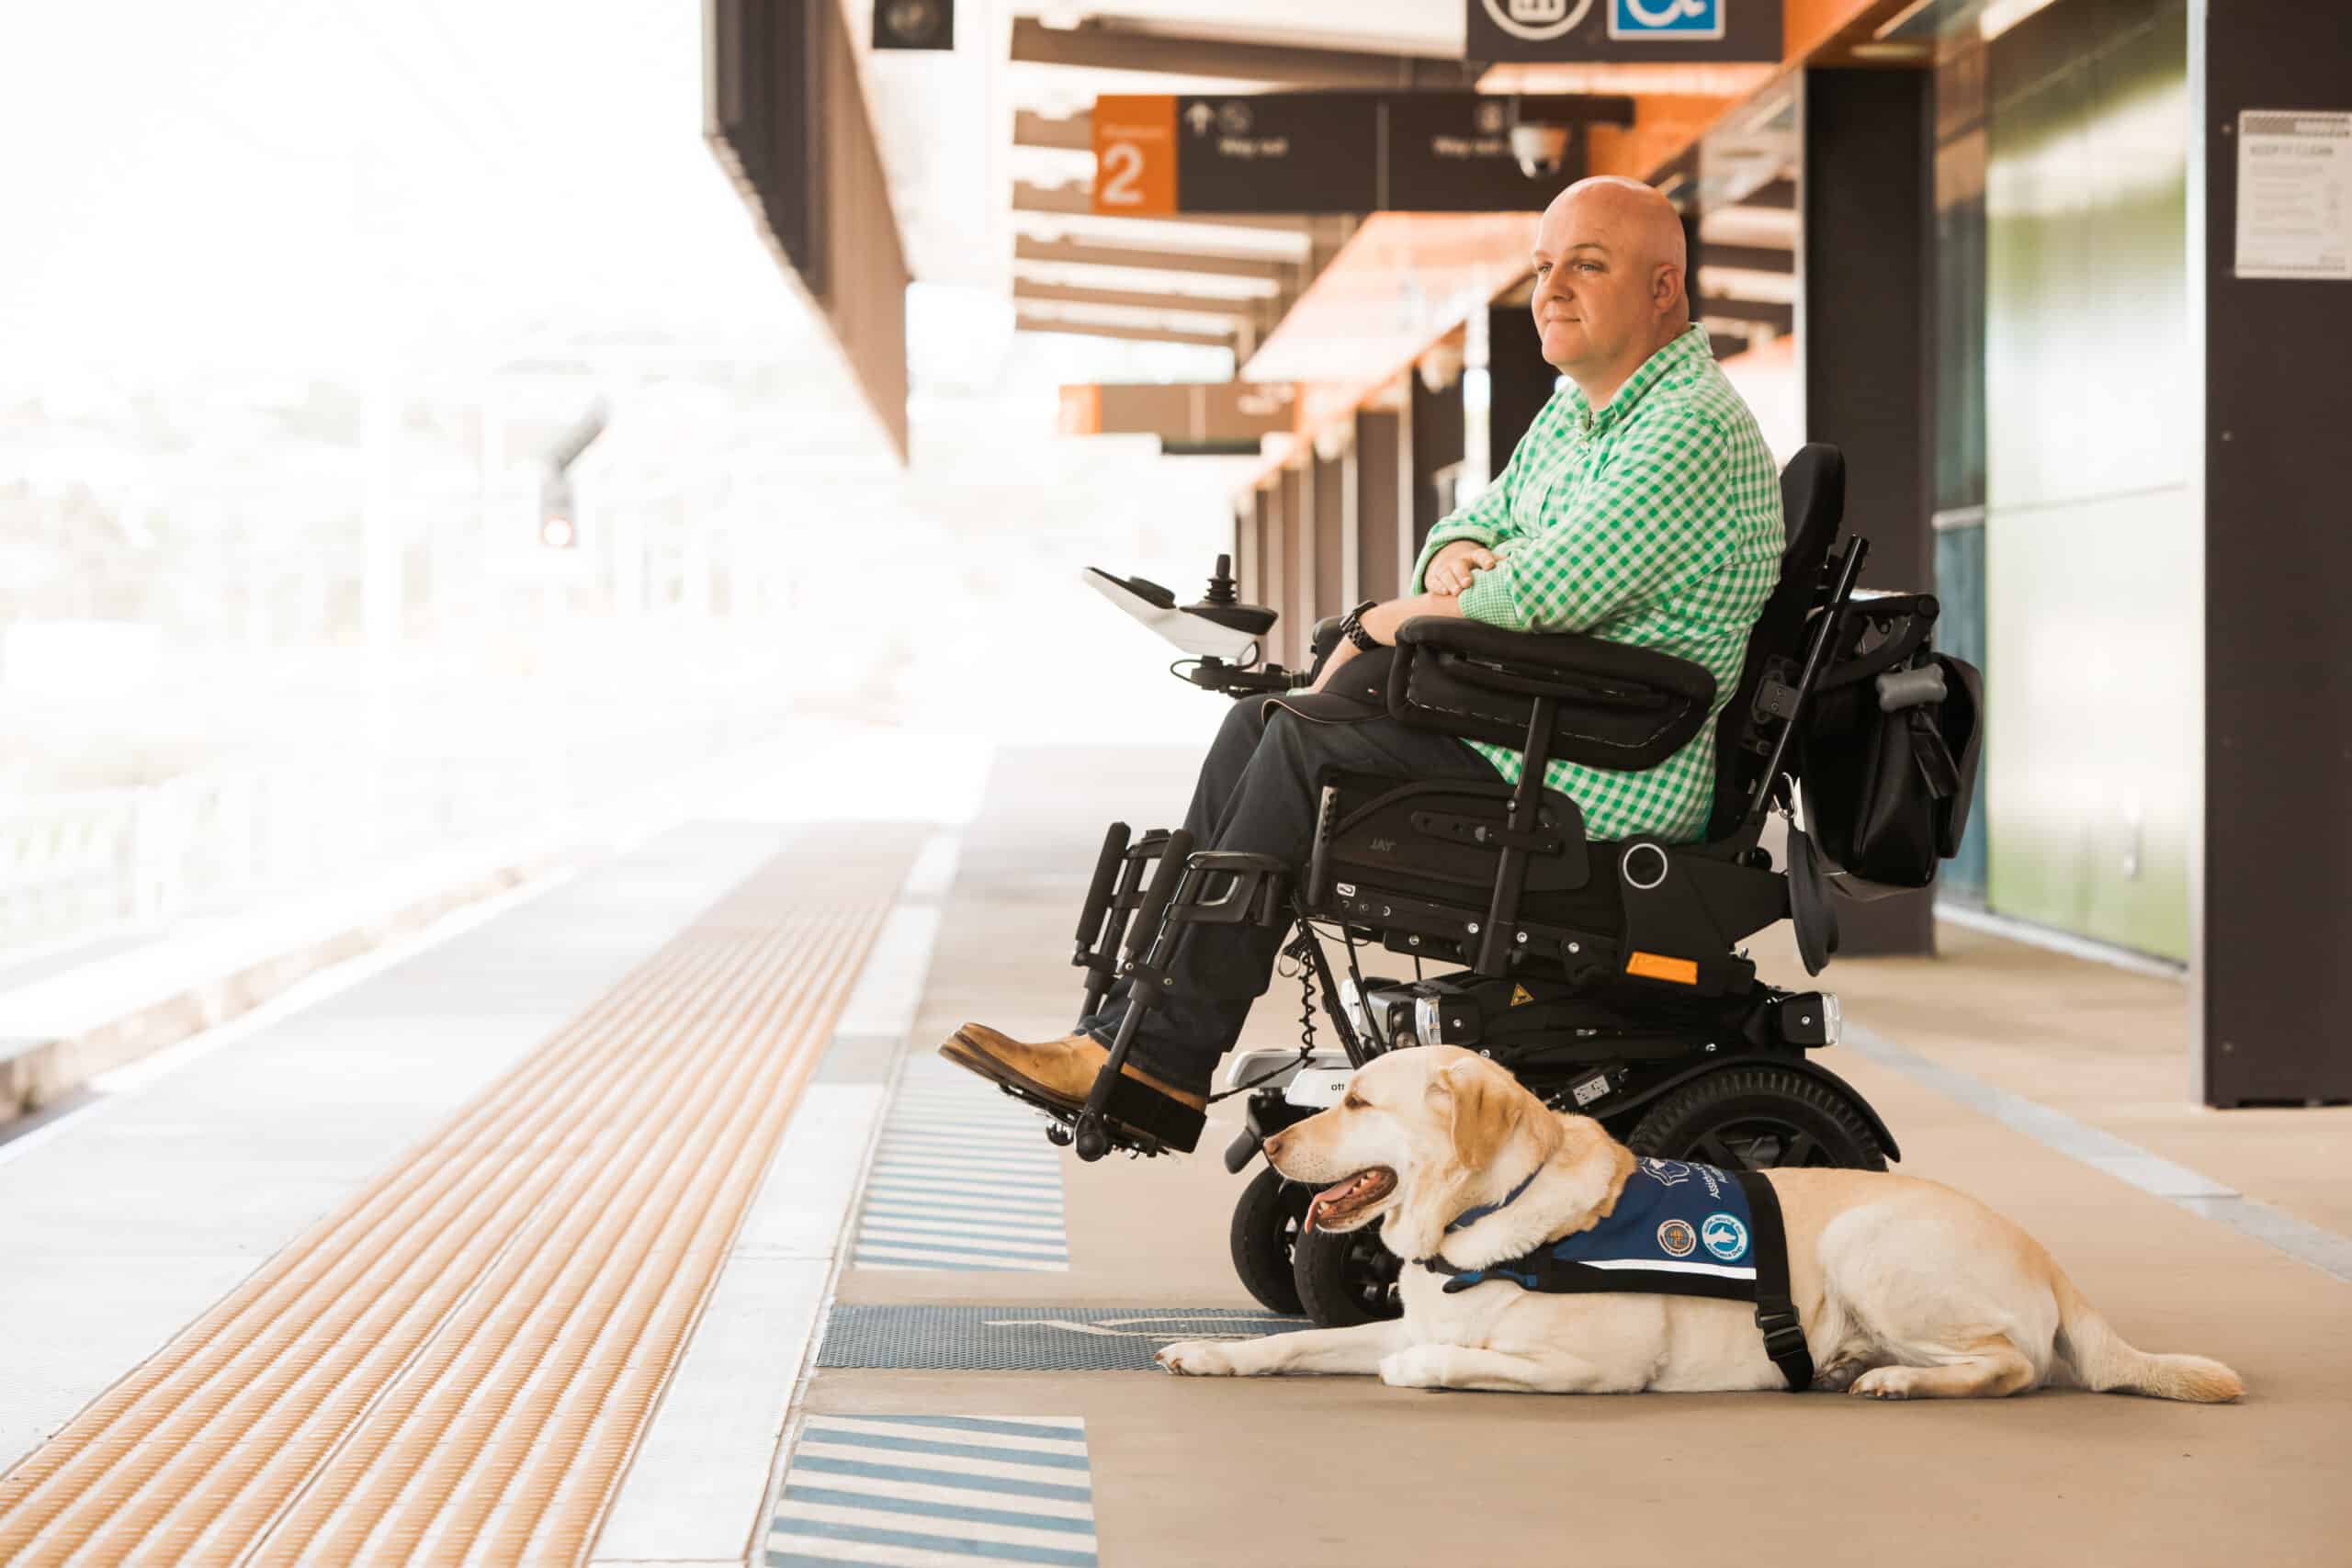 Tim McCallum's assistance dog is not funded by the NDIS